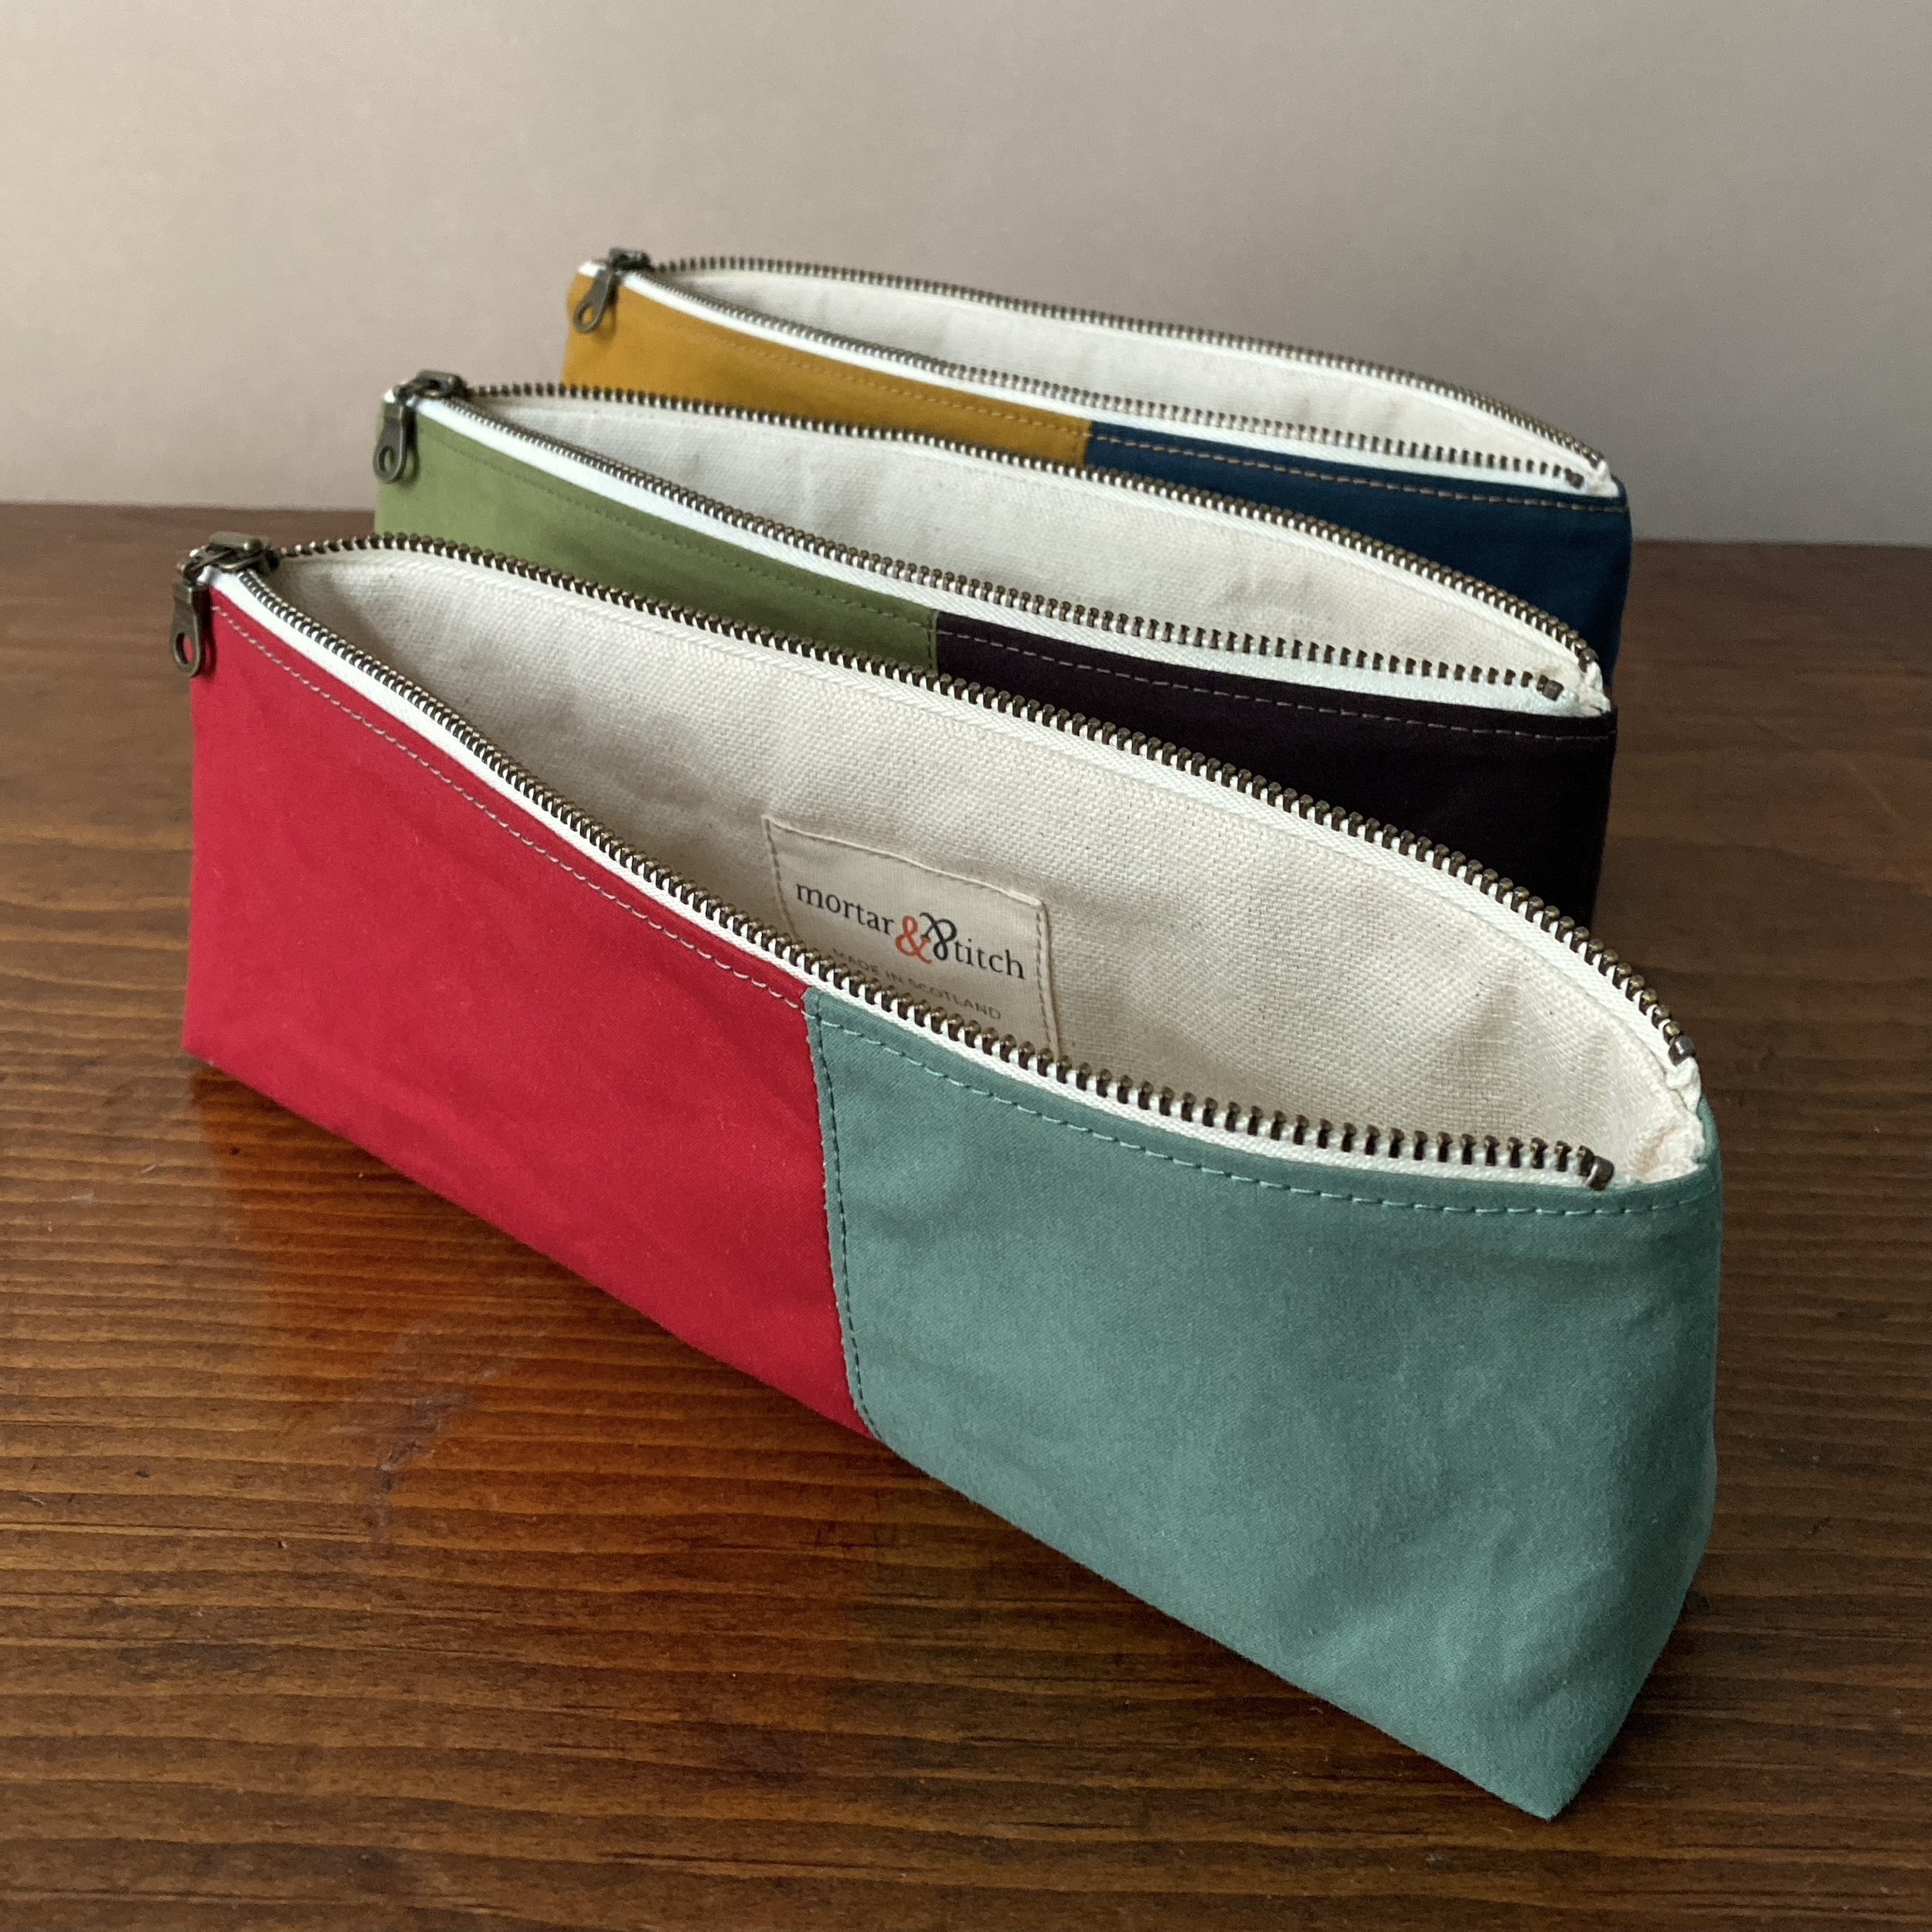 waxed cotton pencil cases inside.JPG